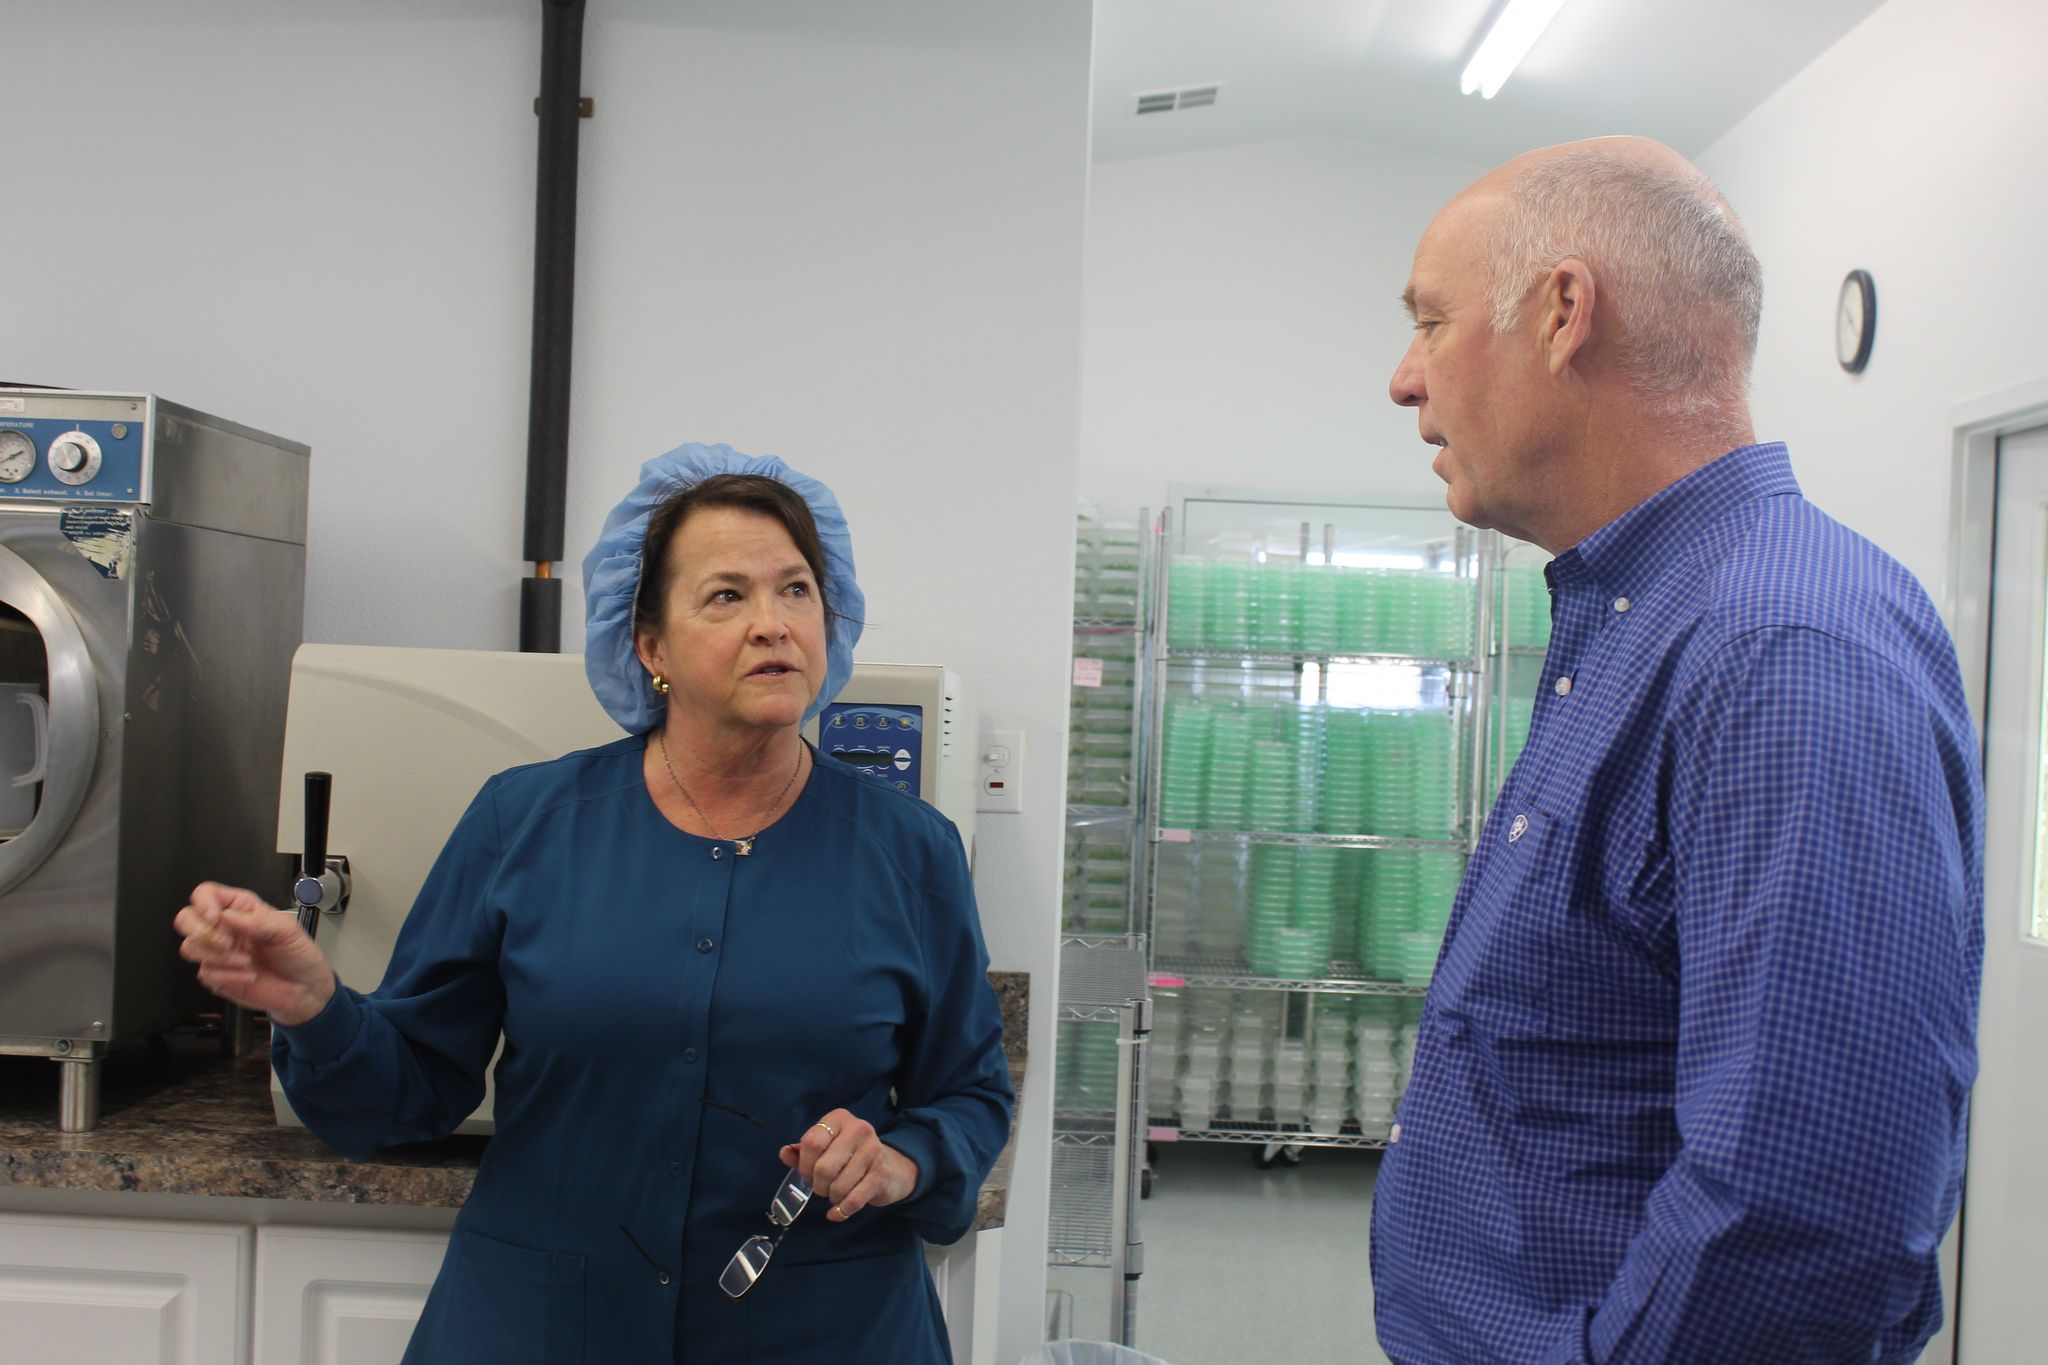 Governor Gianforte toured the on-farm seed lab and observed hundreds of pounds of potatoes being shipped from the farms to market